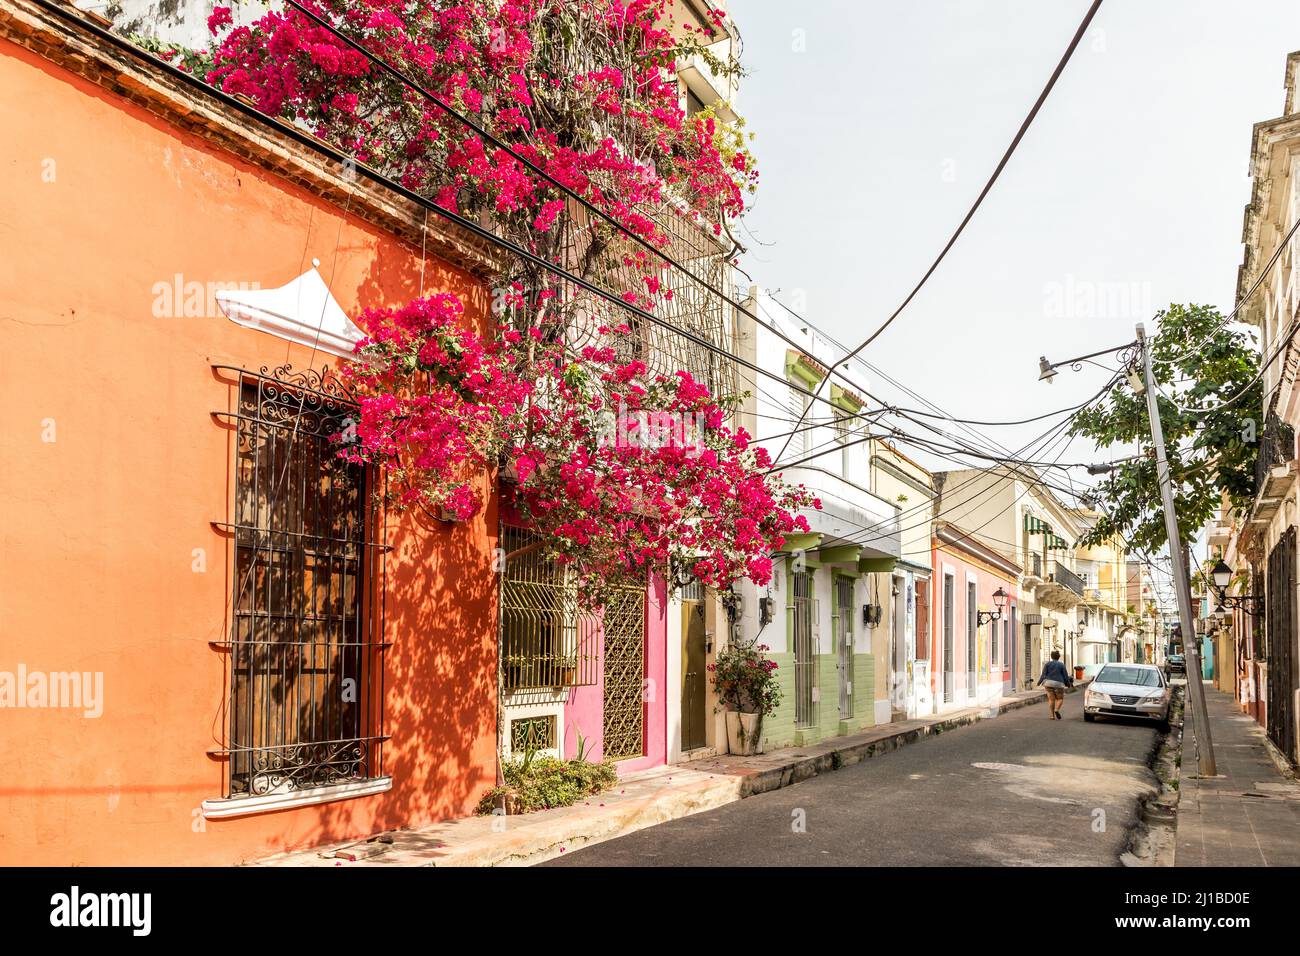 COLORFUL HOUSE, COLONIAL QUARTER LISTED AS A WORLD HERITAGE SITE BY UNESCO, SANTO DOMINGO, DOMINICAN REPUBLIC Stock Photo